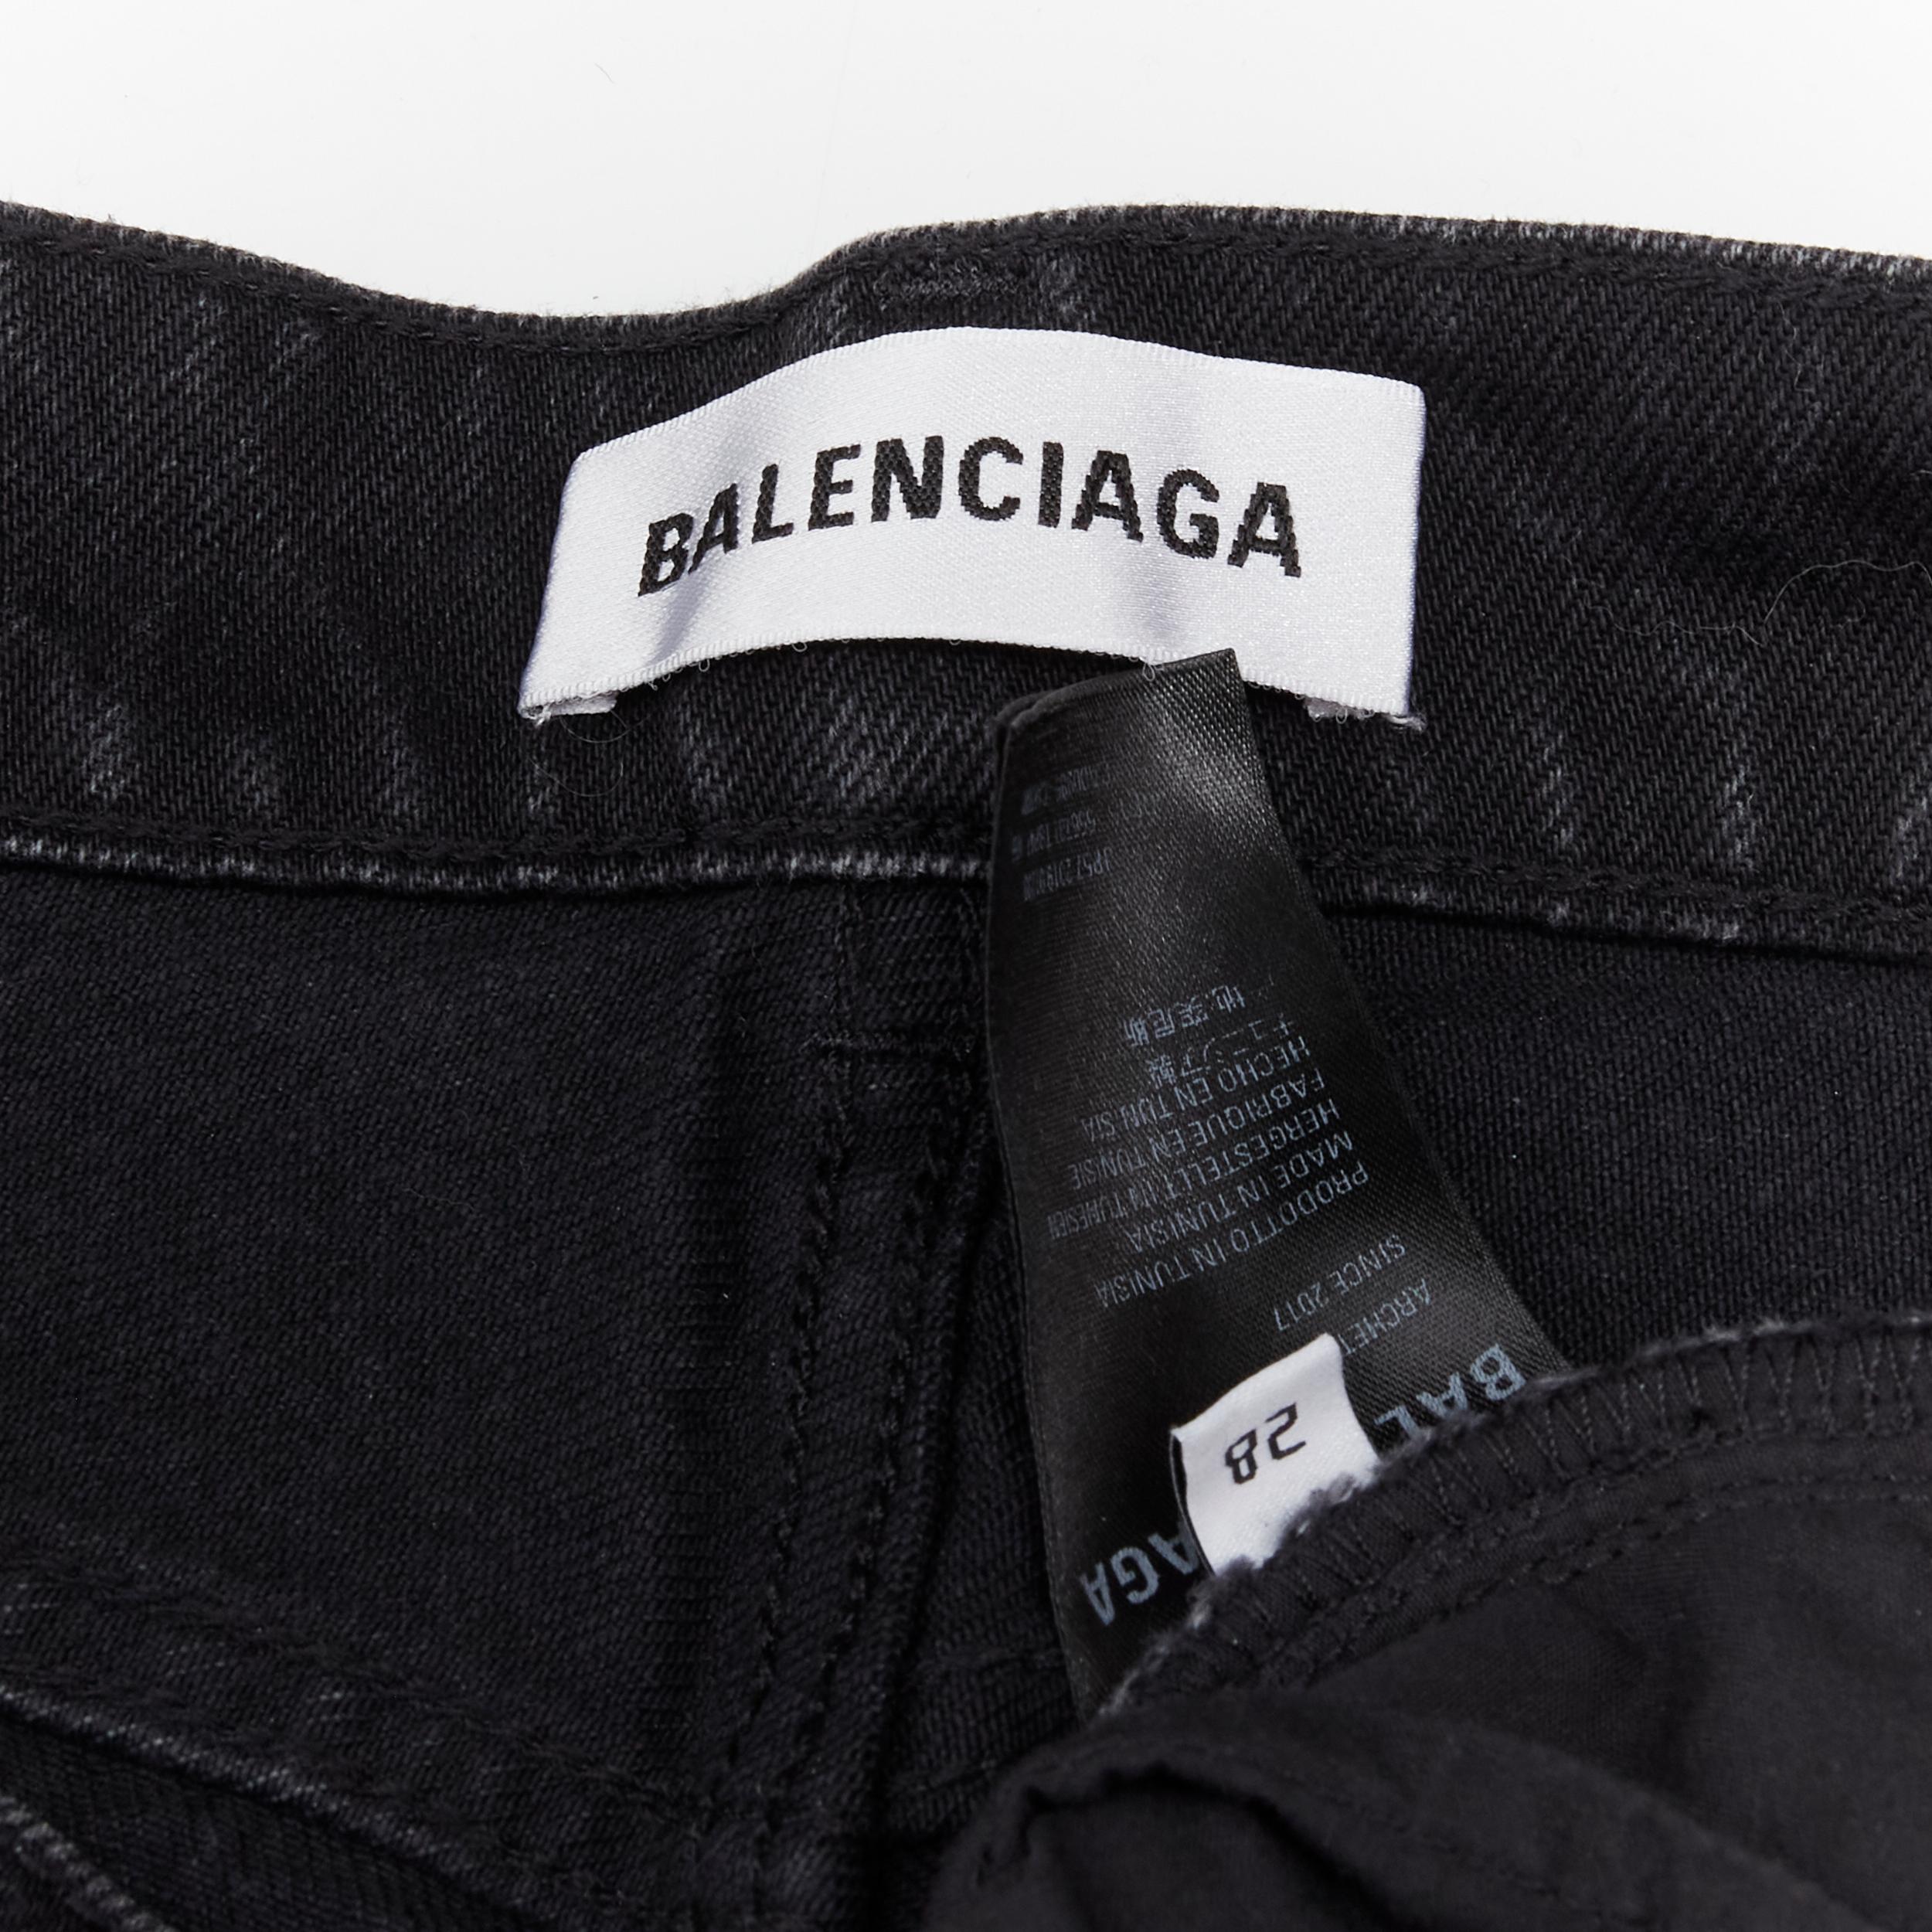 BALENCIAGA black washed denim exposed buttons 5-pocket high waisted jeans 28